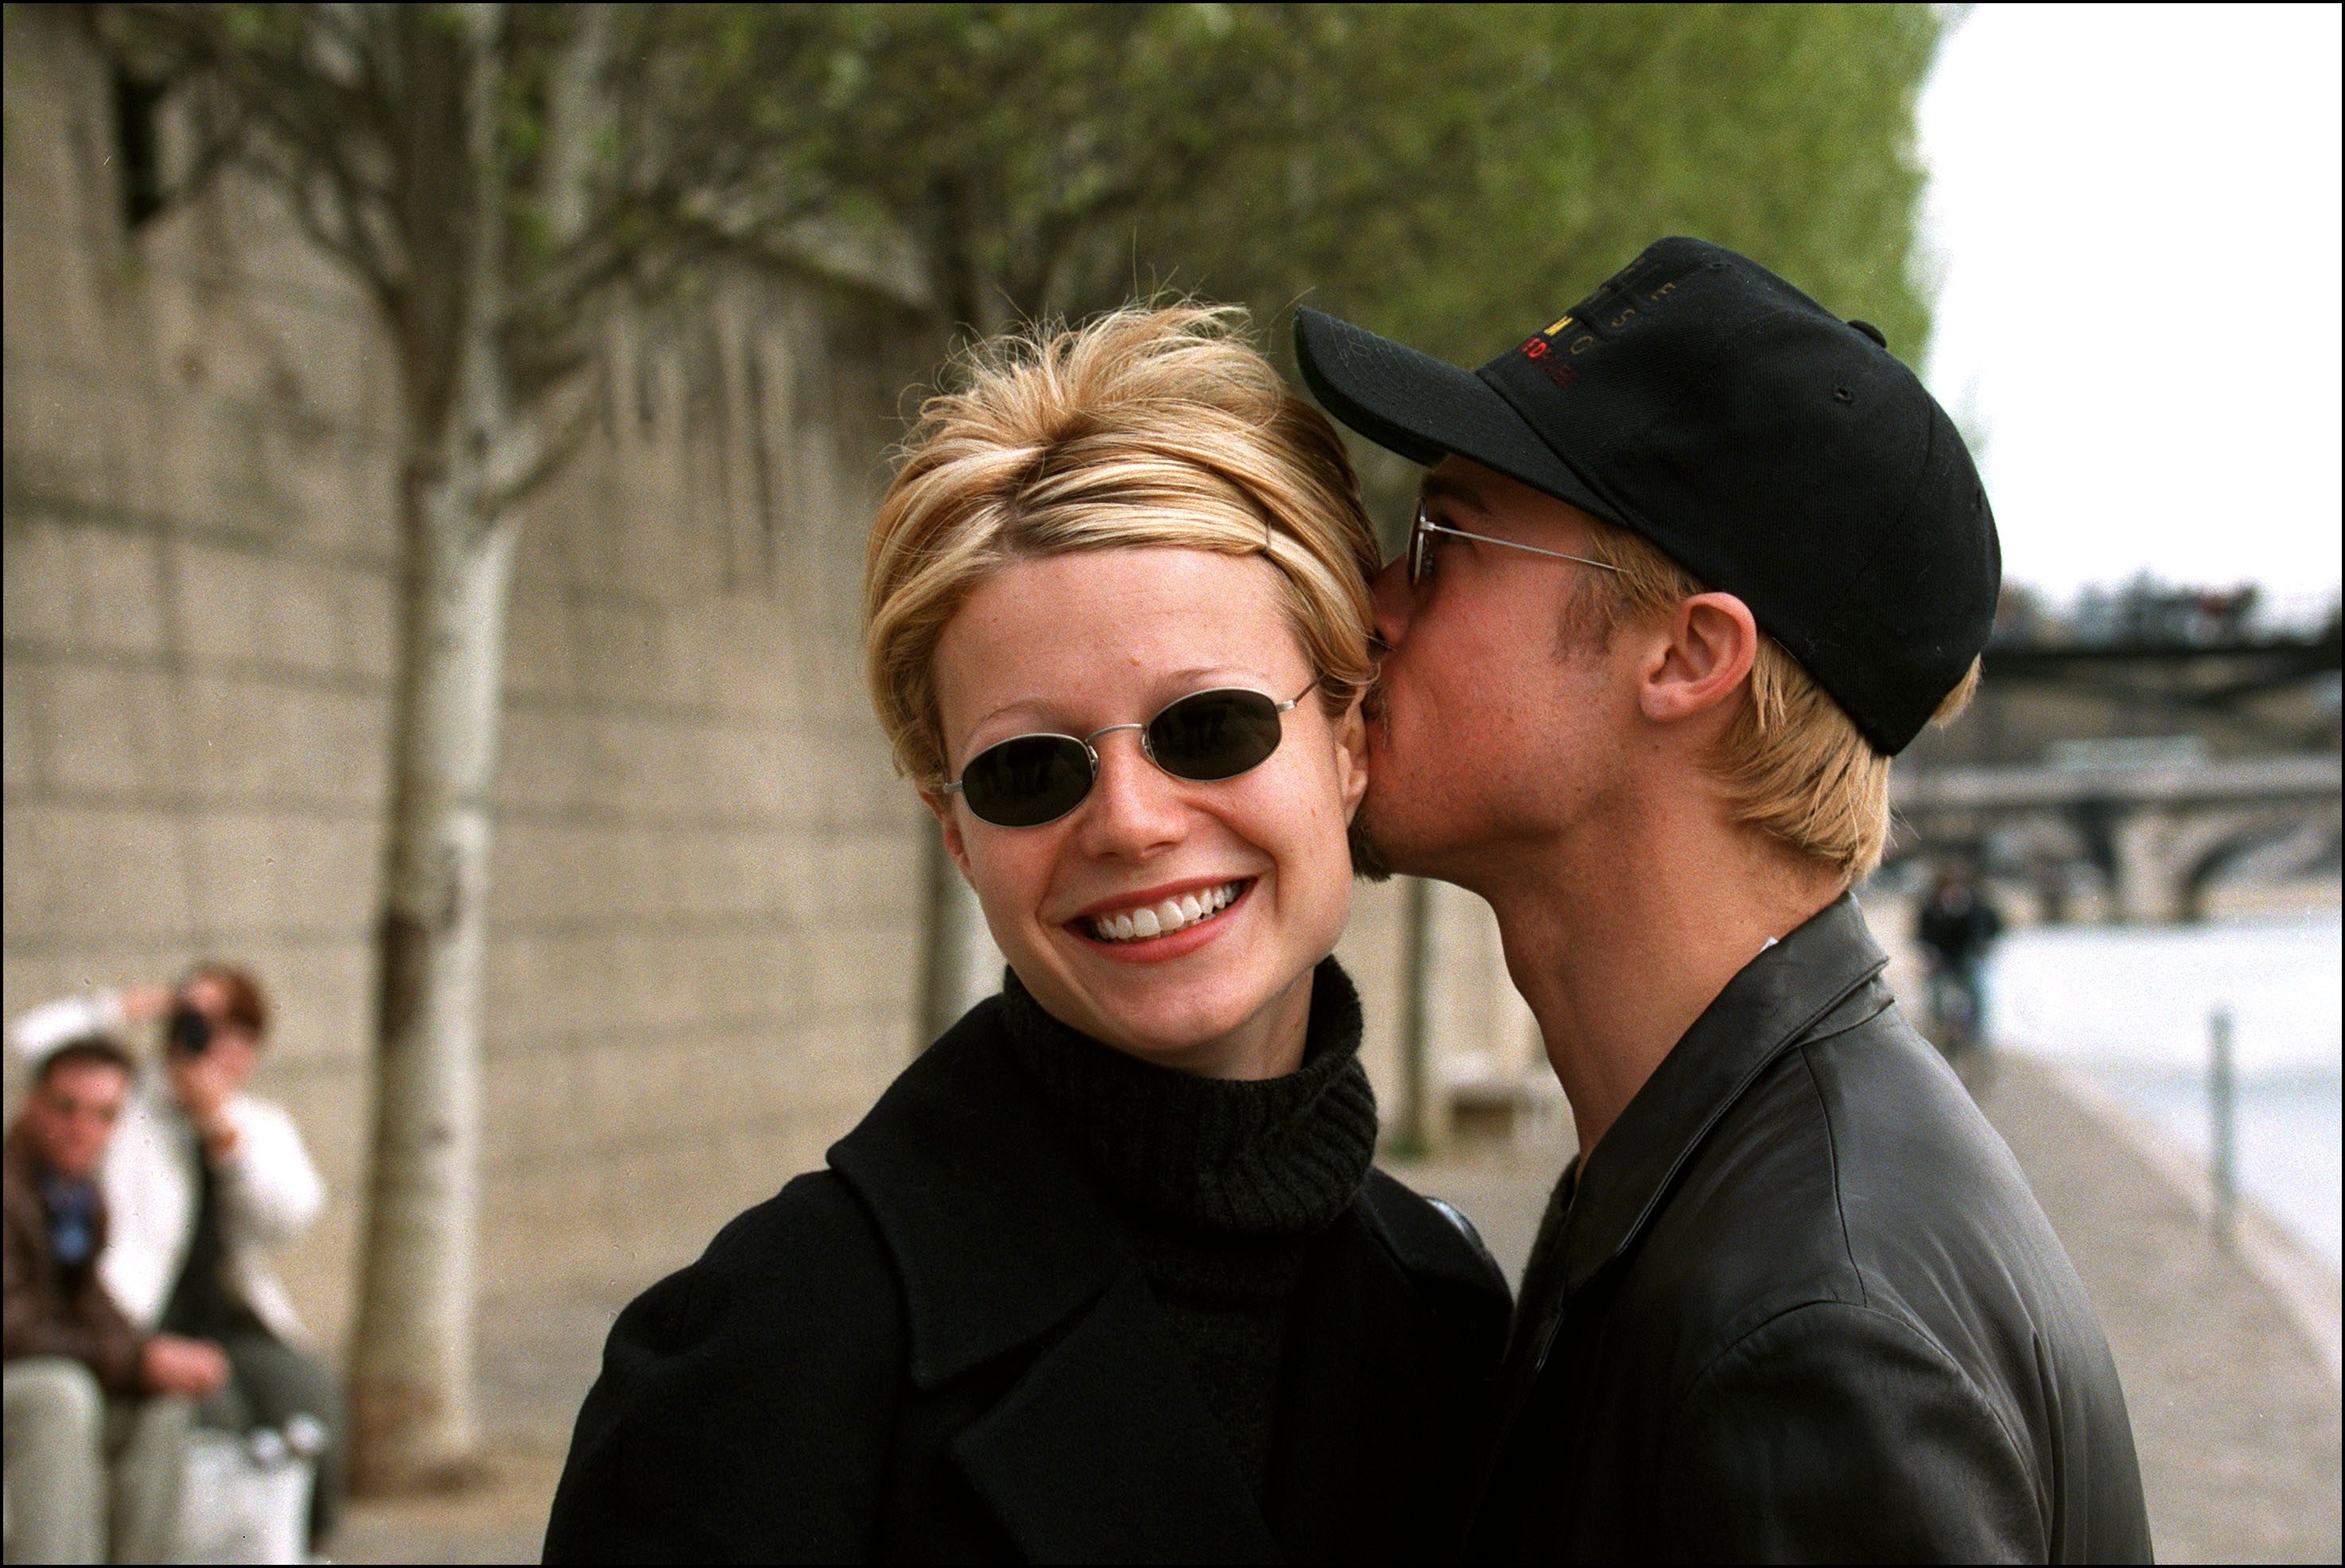 Gwyneth Paltrow and Brad Pitt in Paris on March 29, 1997 | Source: Getty Images